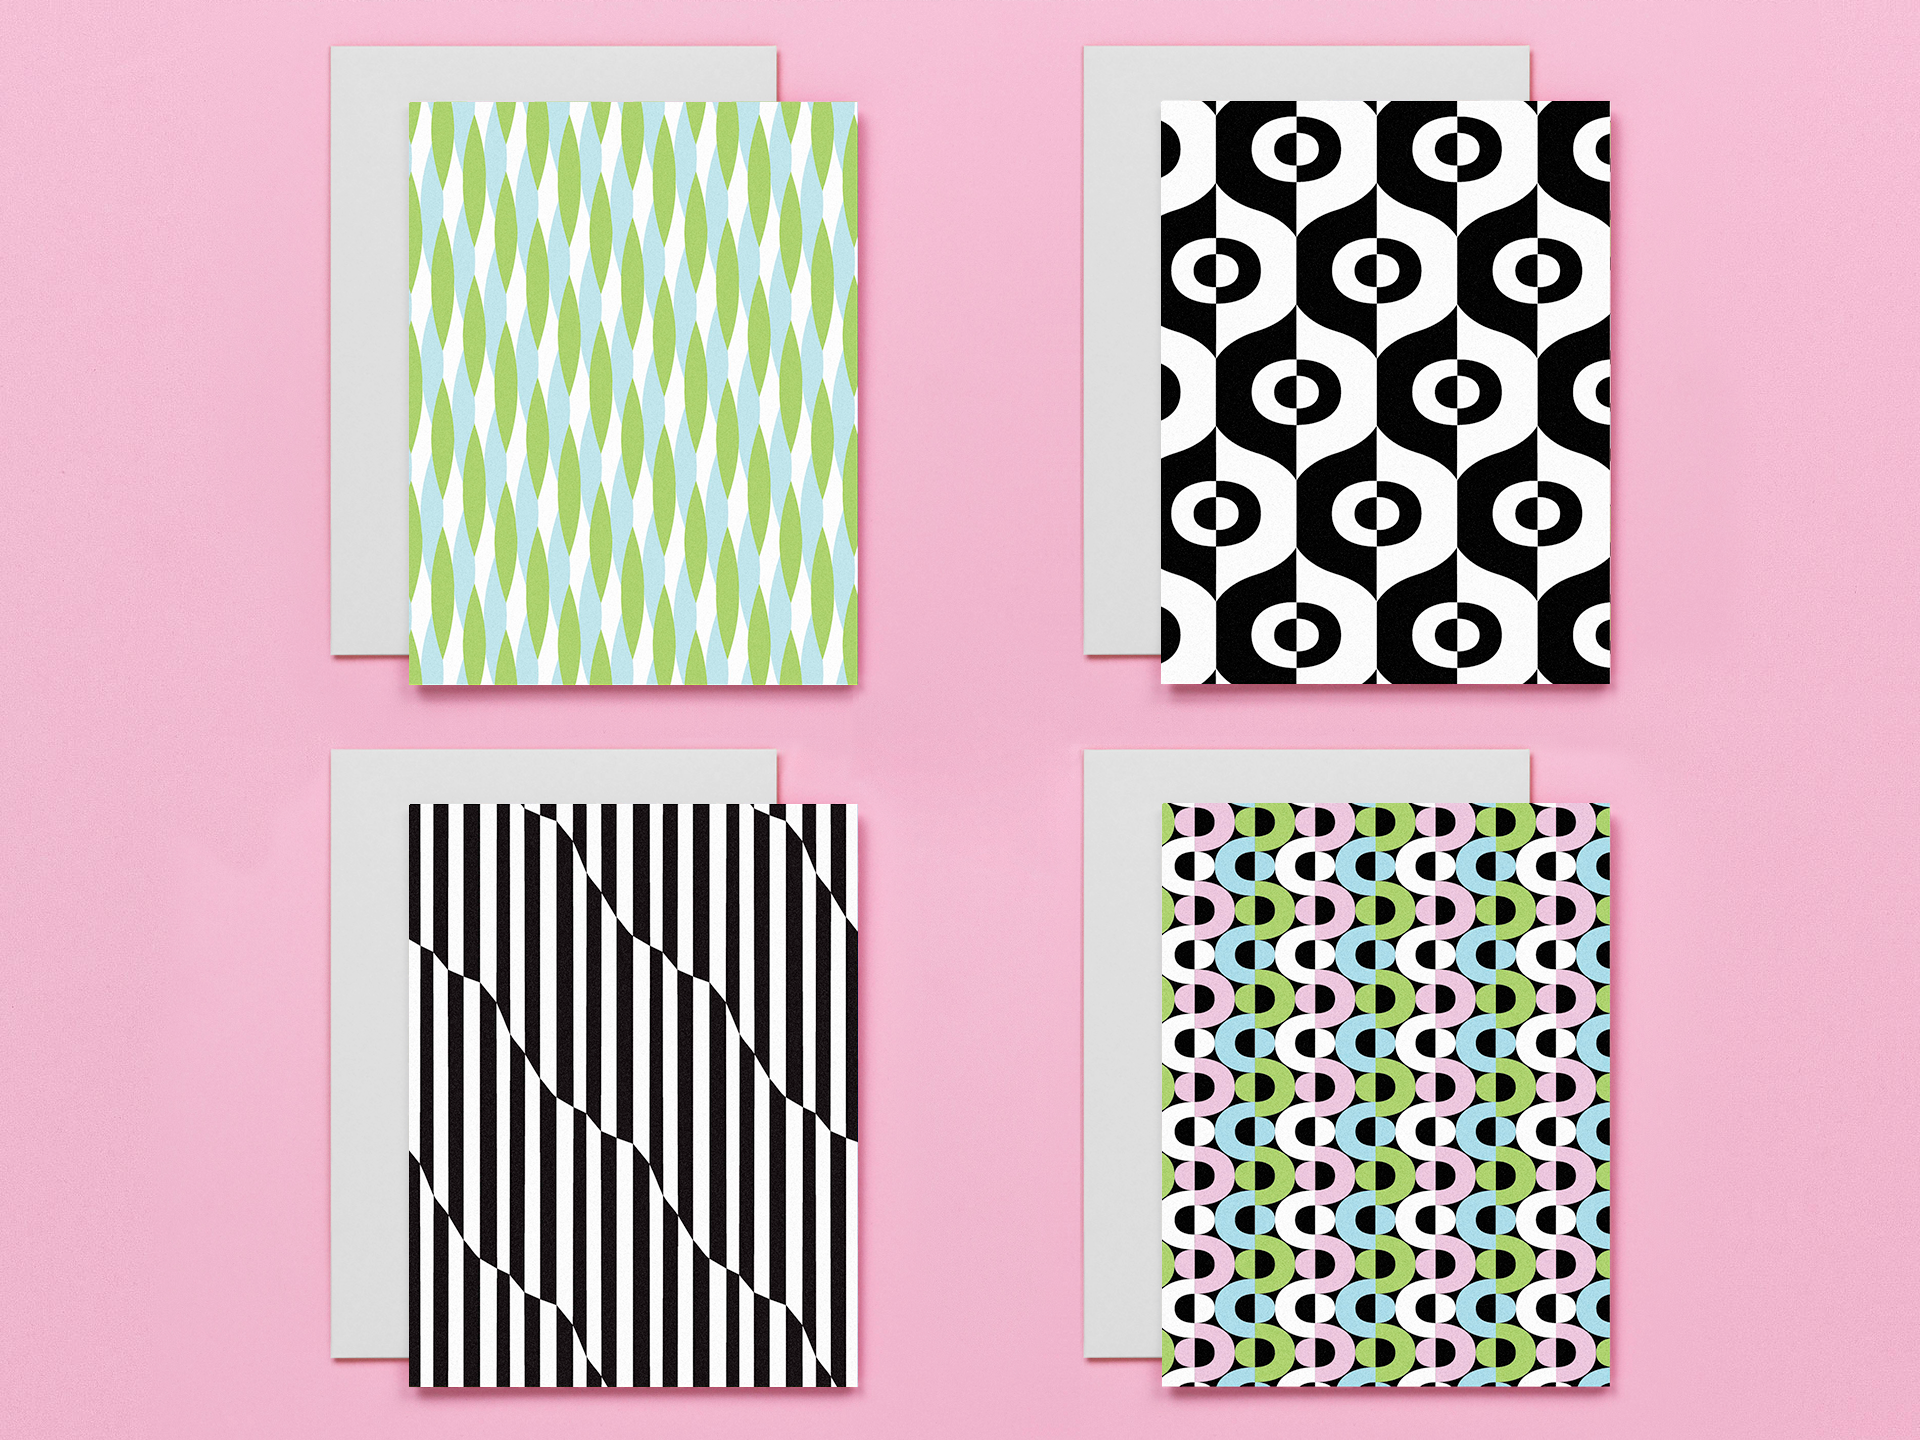 set of 8 vibrant abstract and geometric assorted blank pattern greeting cards with vaguely mod overtones. Mid-century and op art inspired designs. Made in USA by @mydarlin_bk